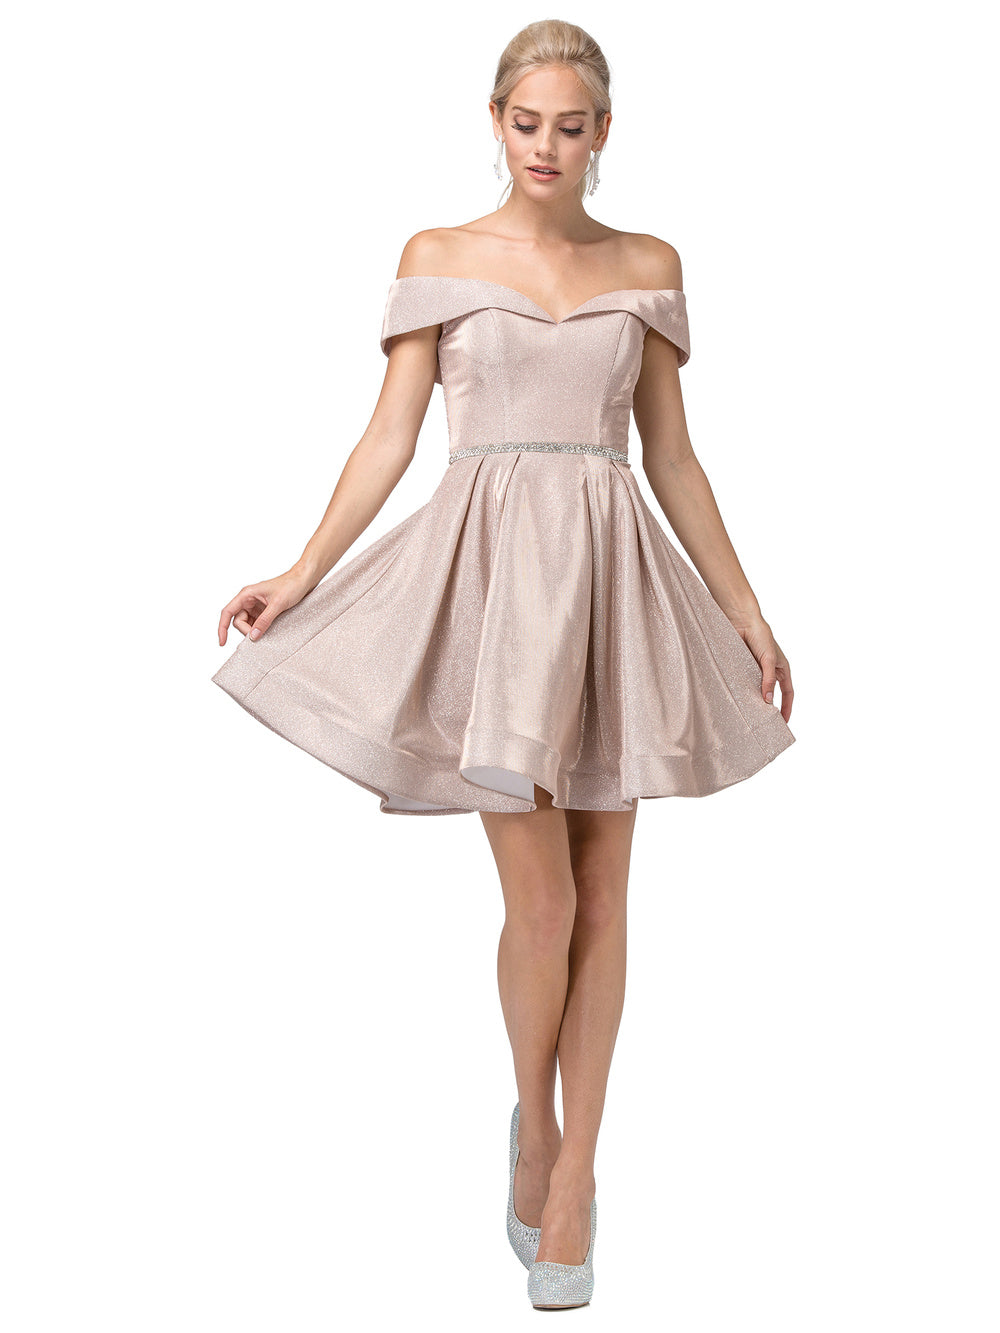 DQ 3147 is a short Shimmering Fit & Flare Short formal cocktail dress. Featuring a sweetheart neckline with full coverage off the shoulder straps. Crystal Rhinestone embellished waist belt. Pocket in flared skirt. Horse hair edged trim. great for homecoming & almost any formal event!